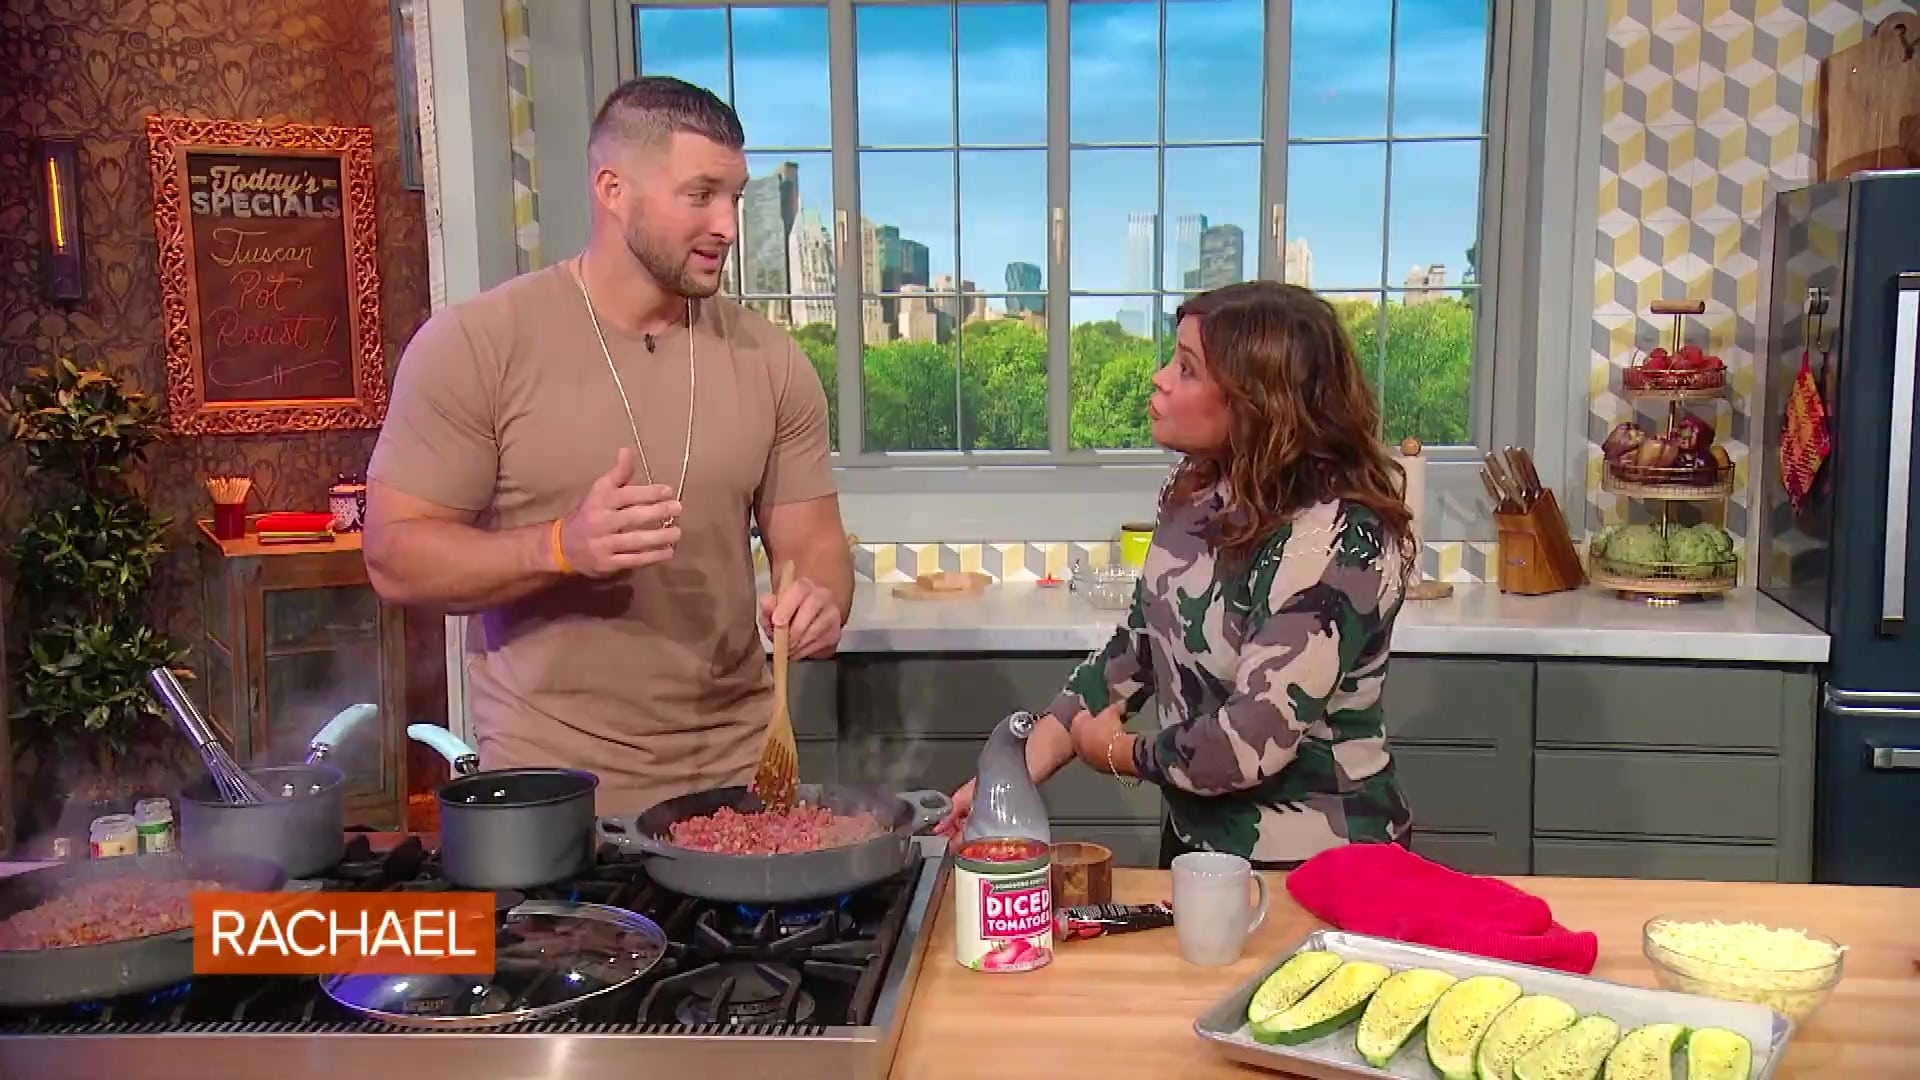 Rachael Ray Season 14 :Episode 27  Tim Tebow and Rach are cooking up a keto-friendly lasagna dish